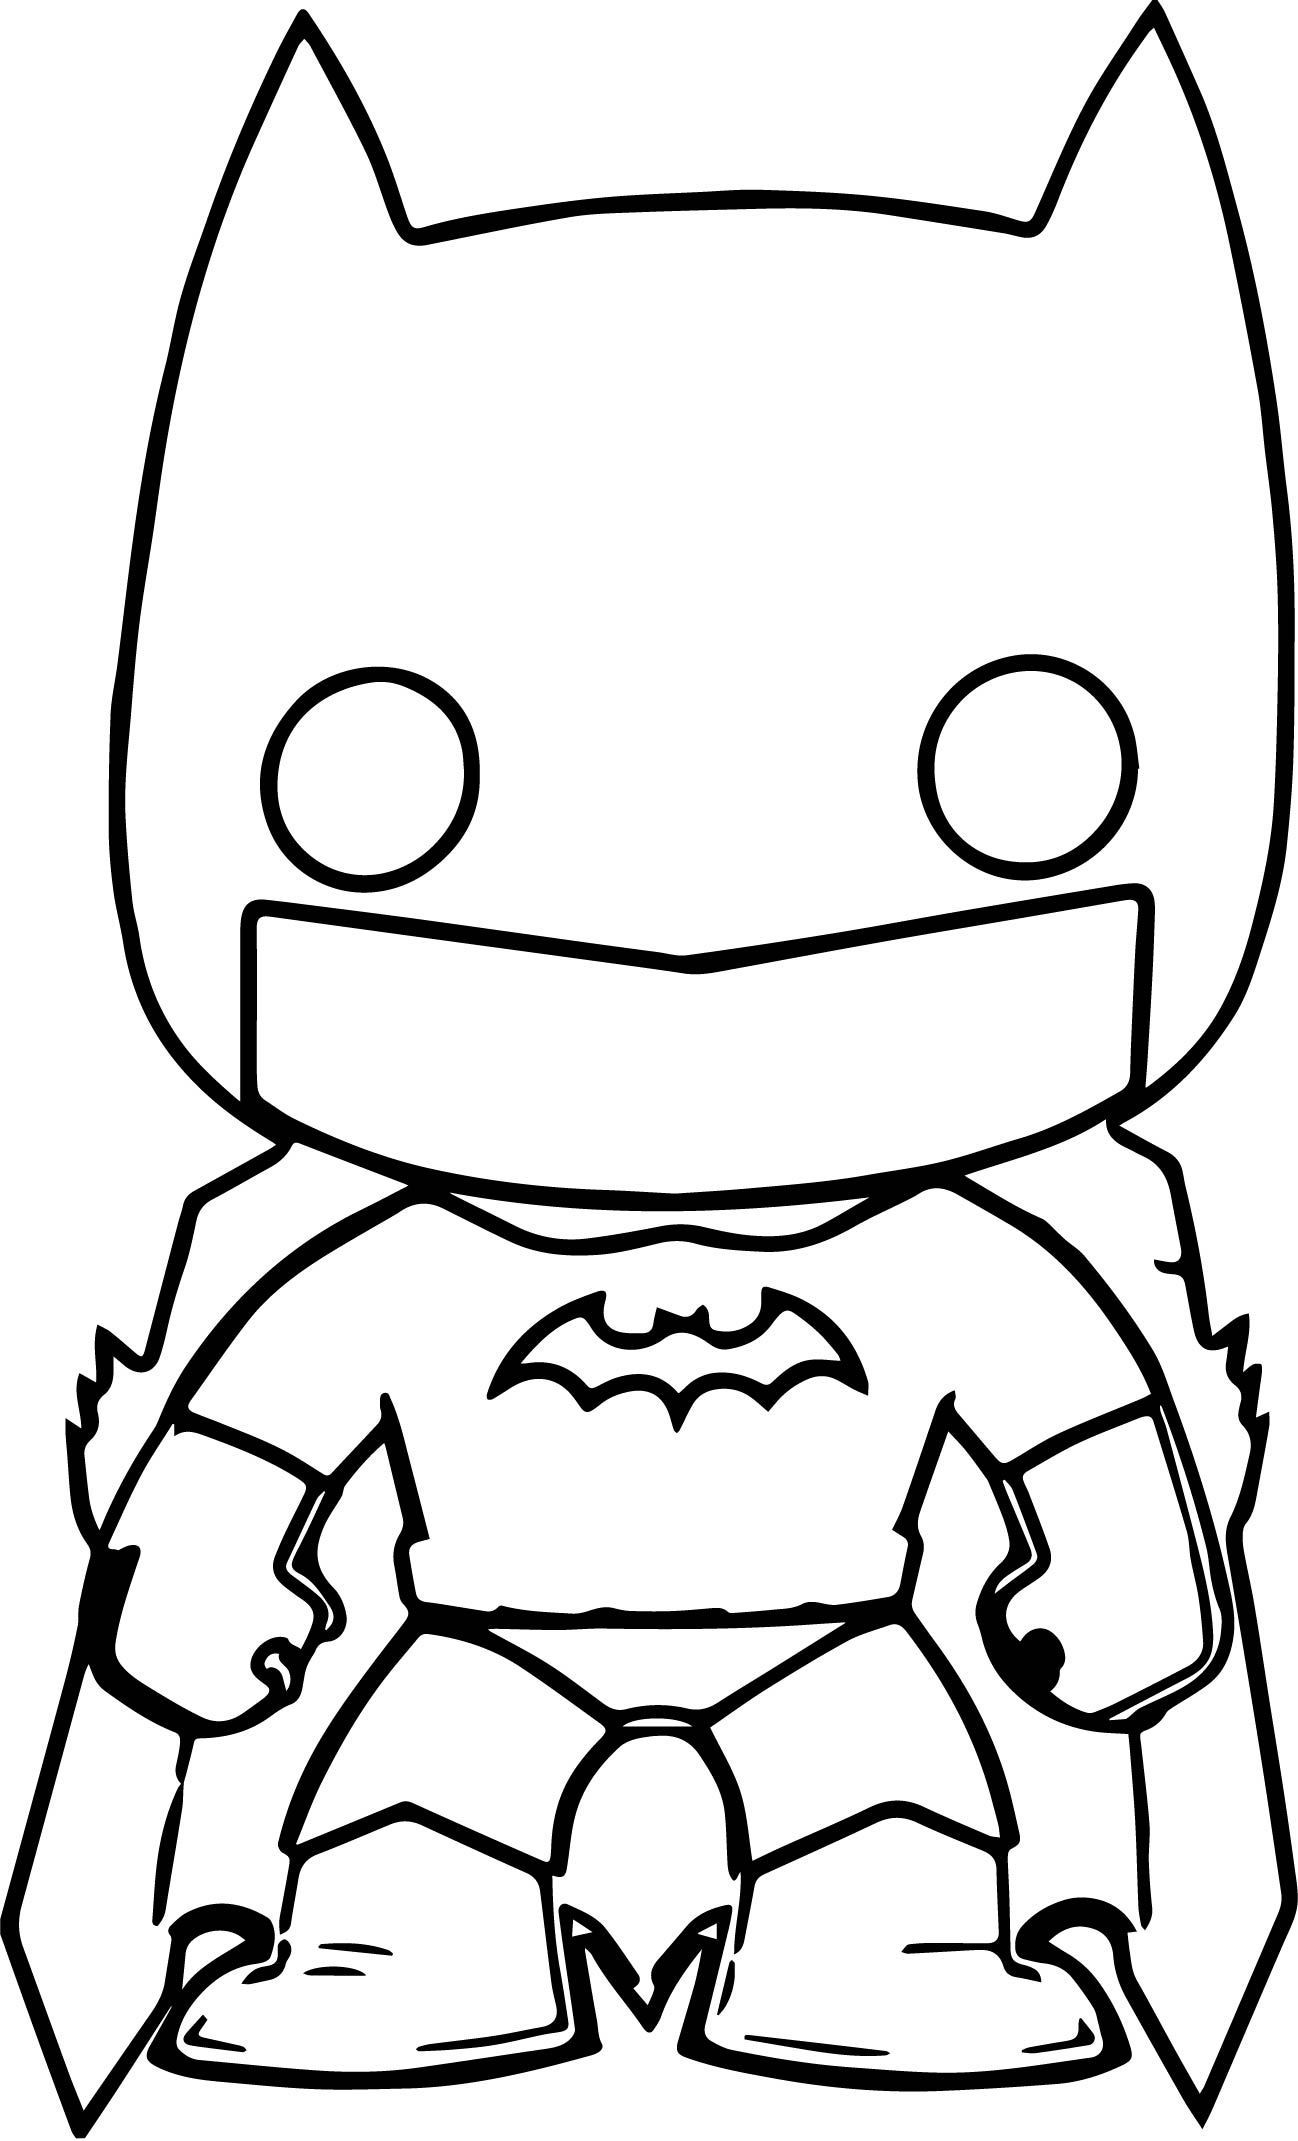 funko-pop-coloring-pages-best-coloring-pages-for-kids